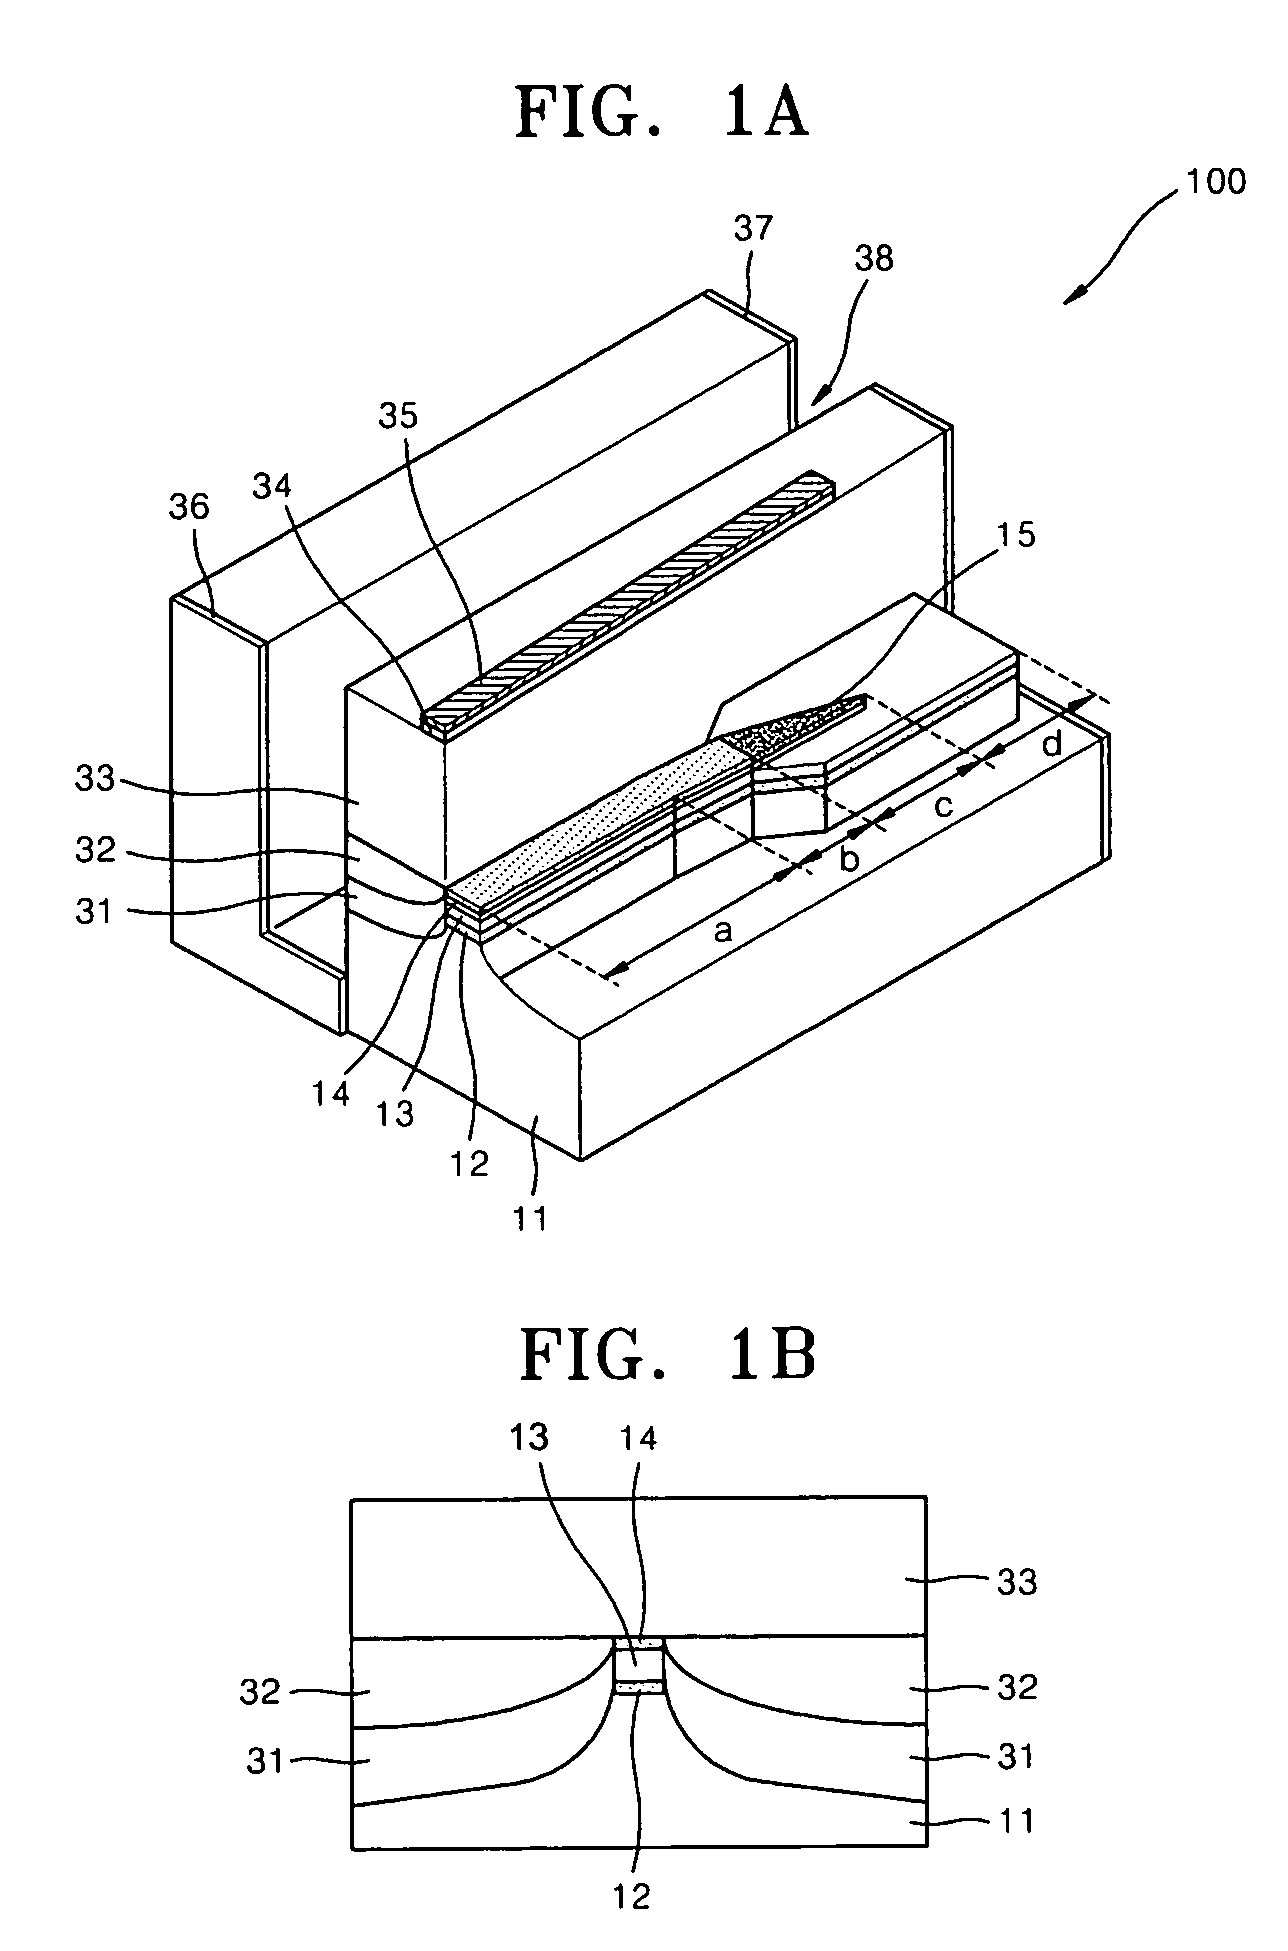 Reflective semiconductor optical amplifier (R-SOA) with dual buried heterostructure